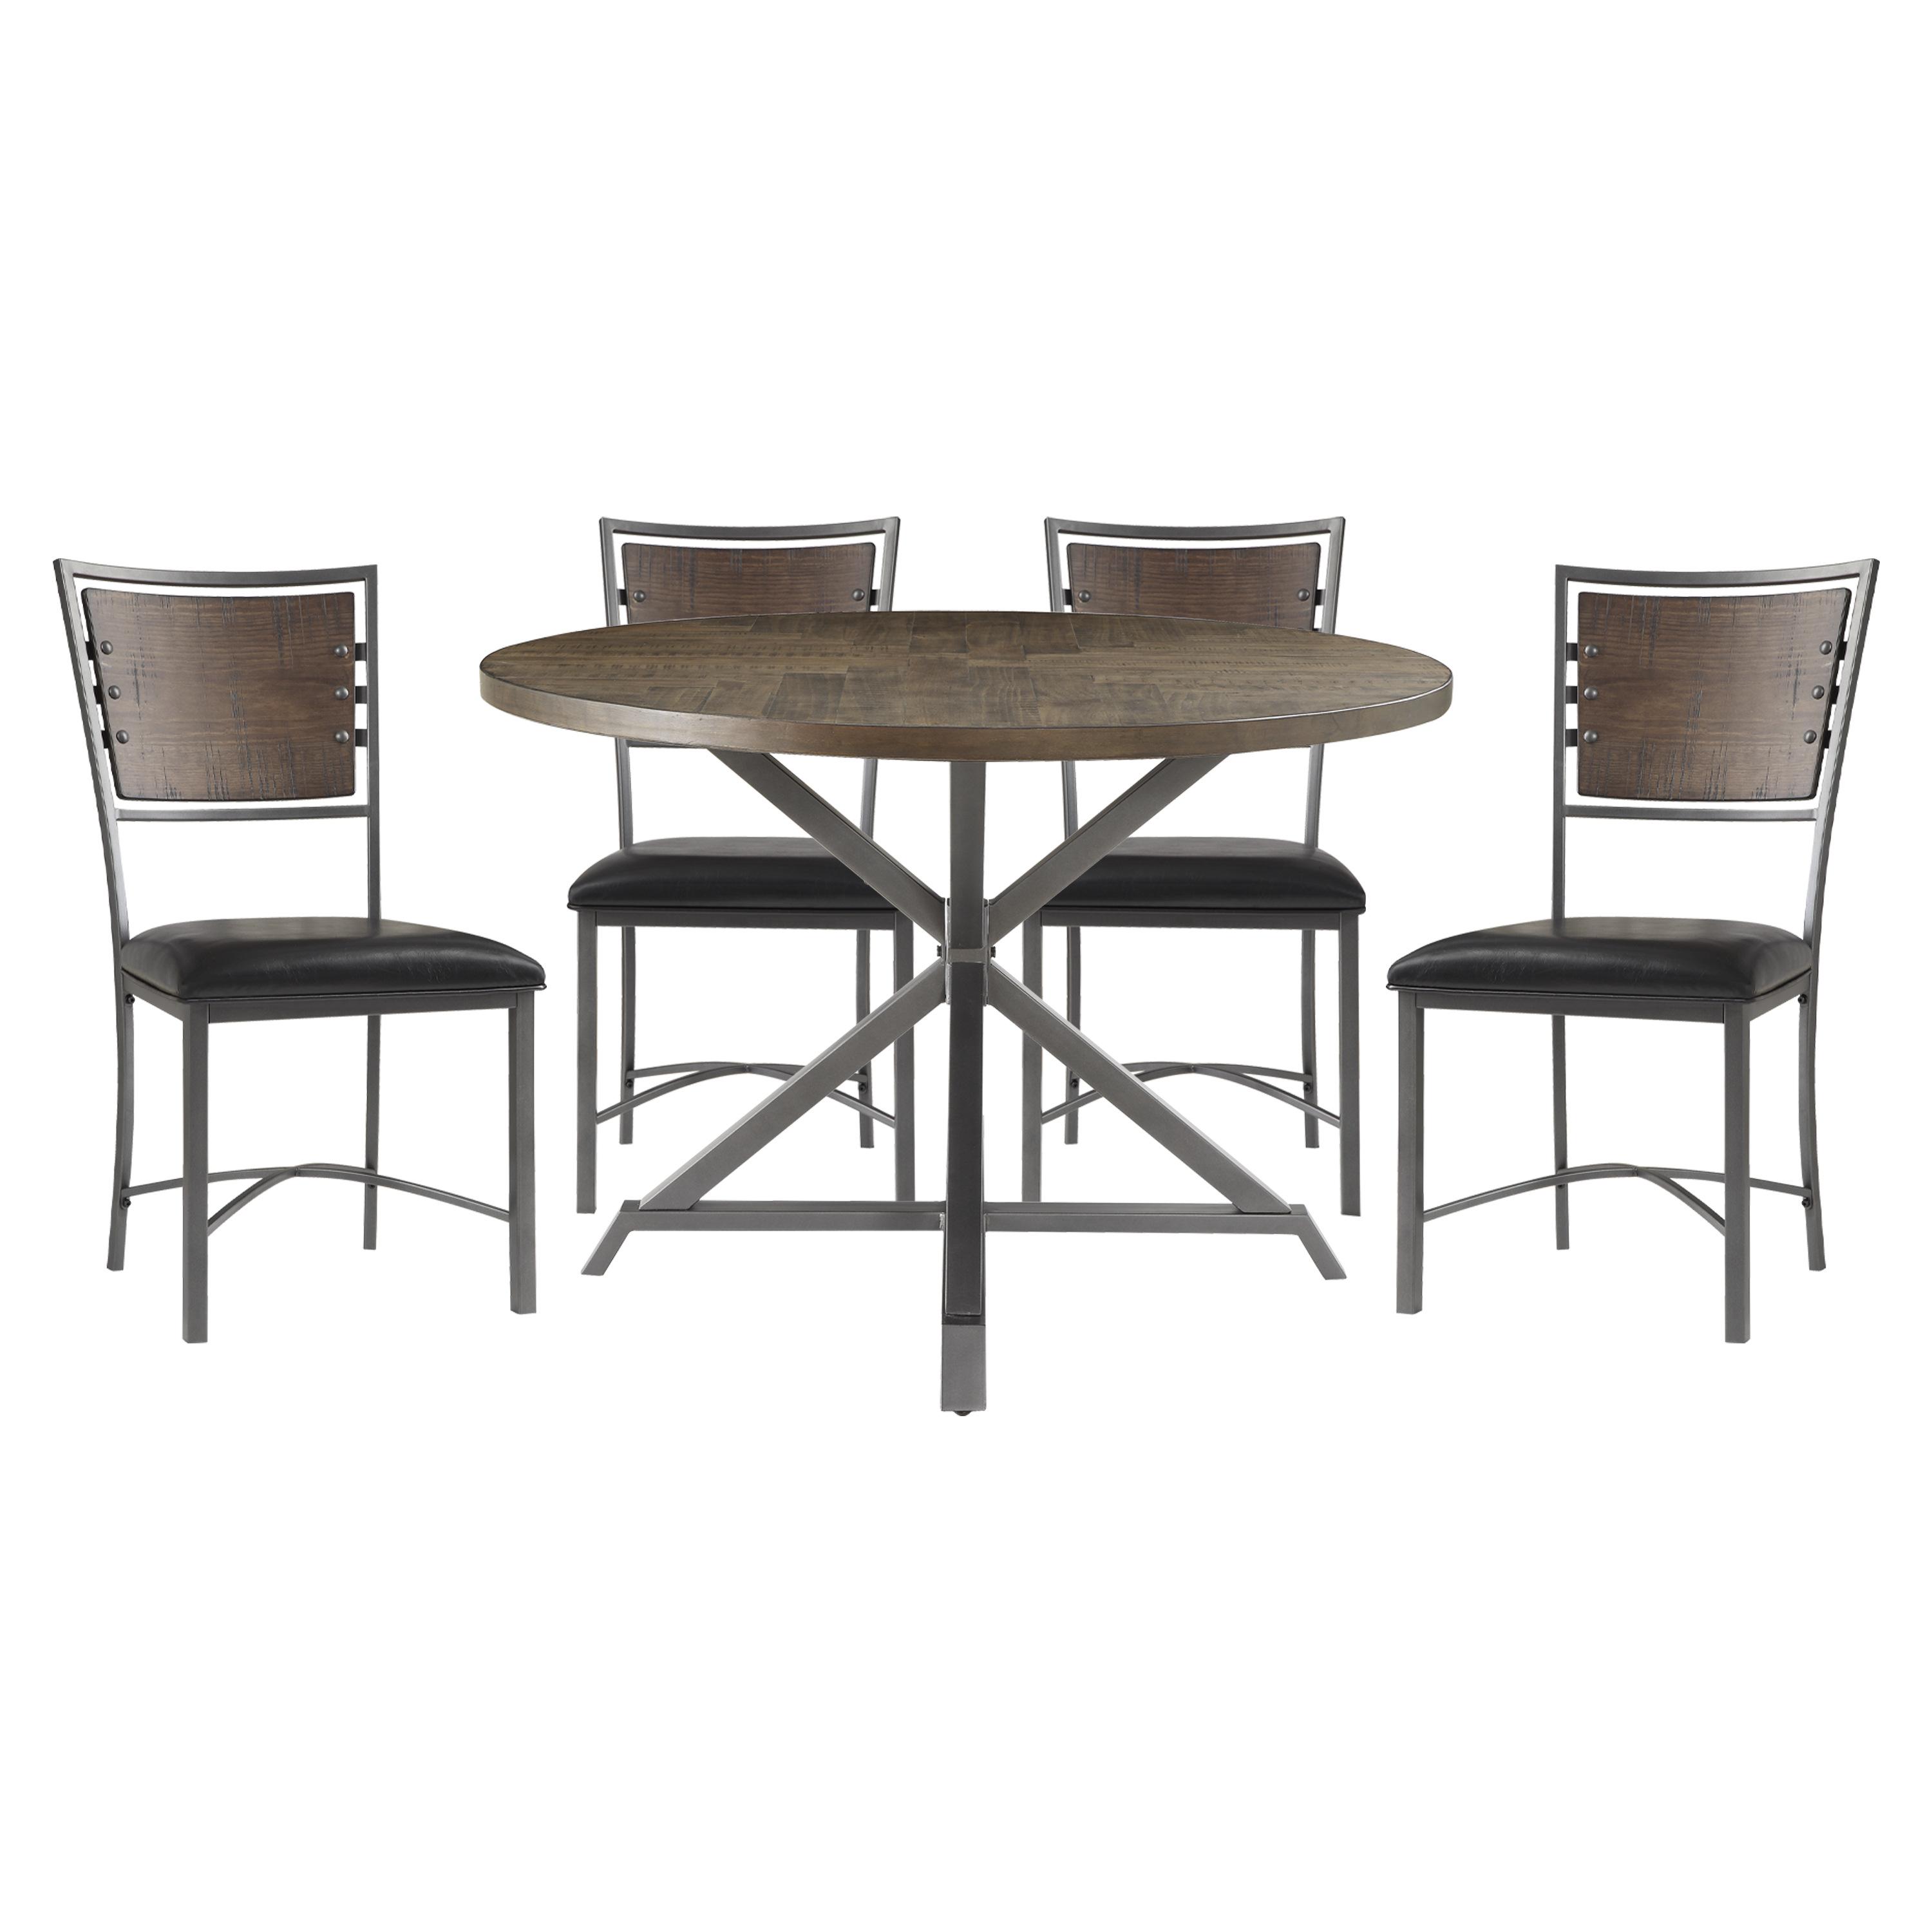 Rustic Dining Room Set 5606-45RD*5PC Fideo 5606-45RD*5PC in Brown Faux Leather